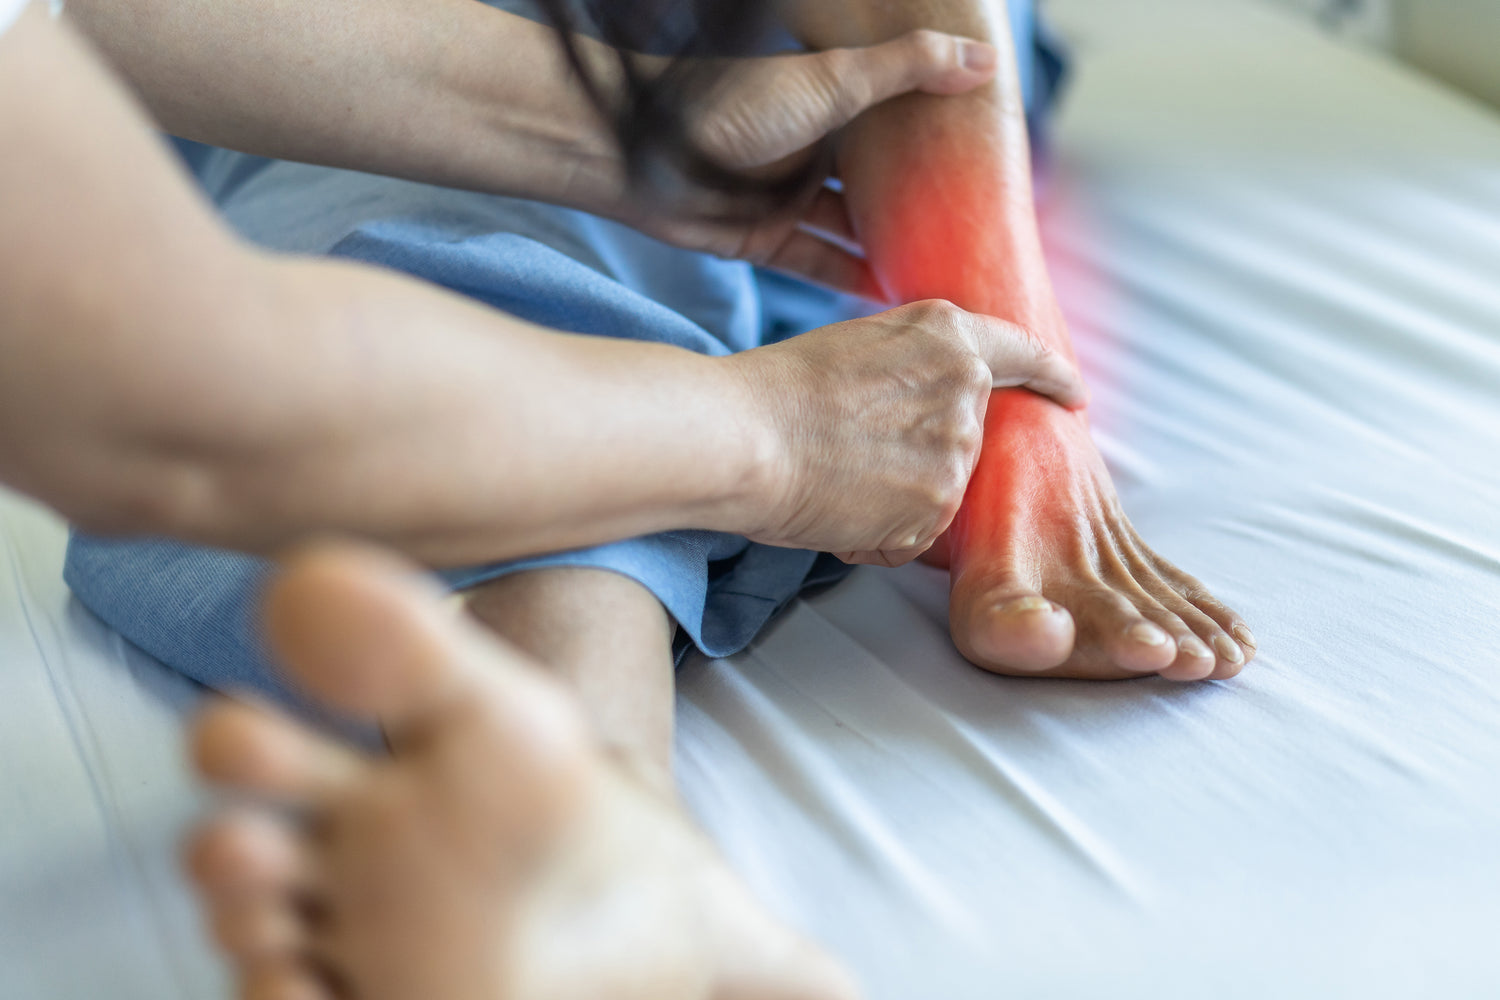 Compression and Arthritis: Can it Help?